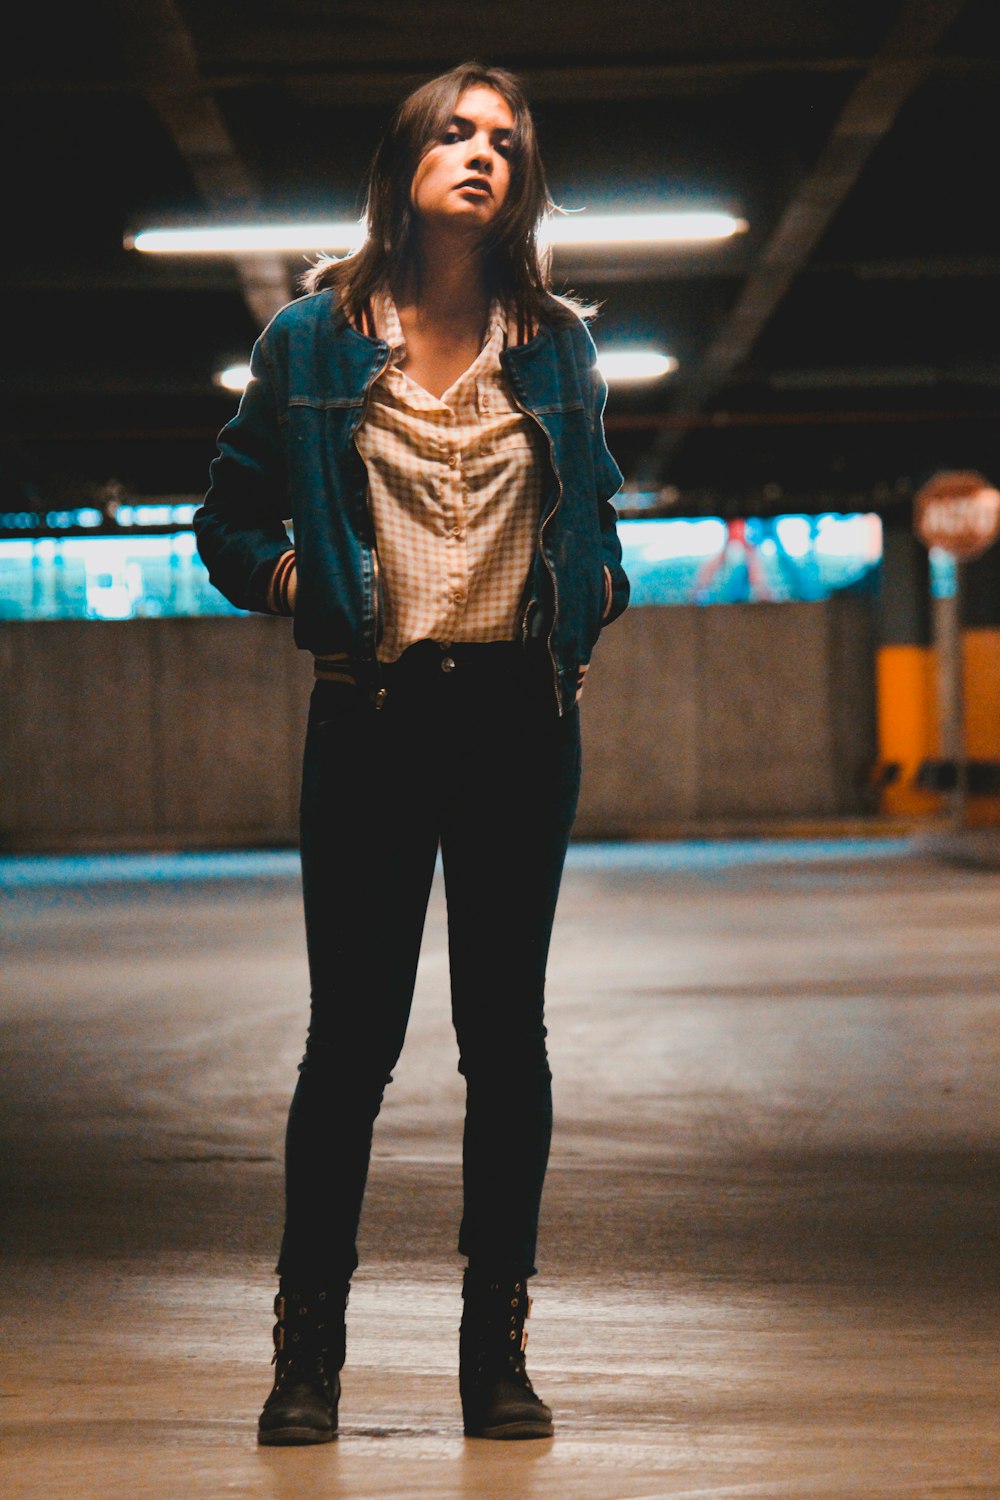 woman in gray jacket and black pants standing on gray pavement